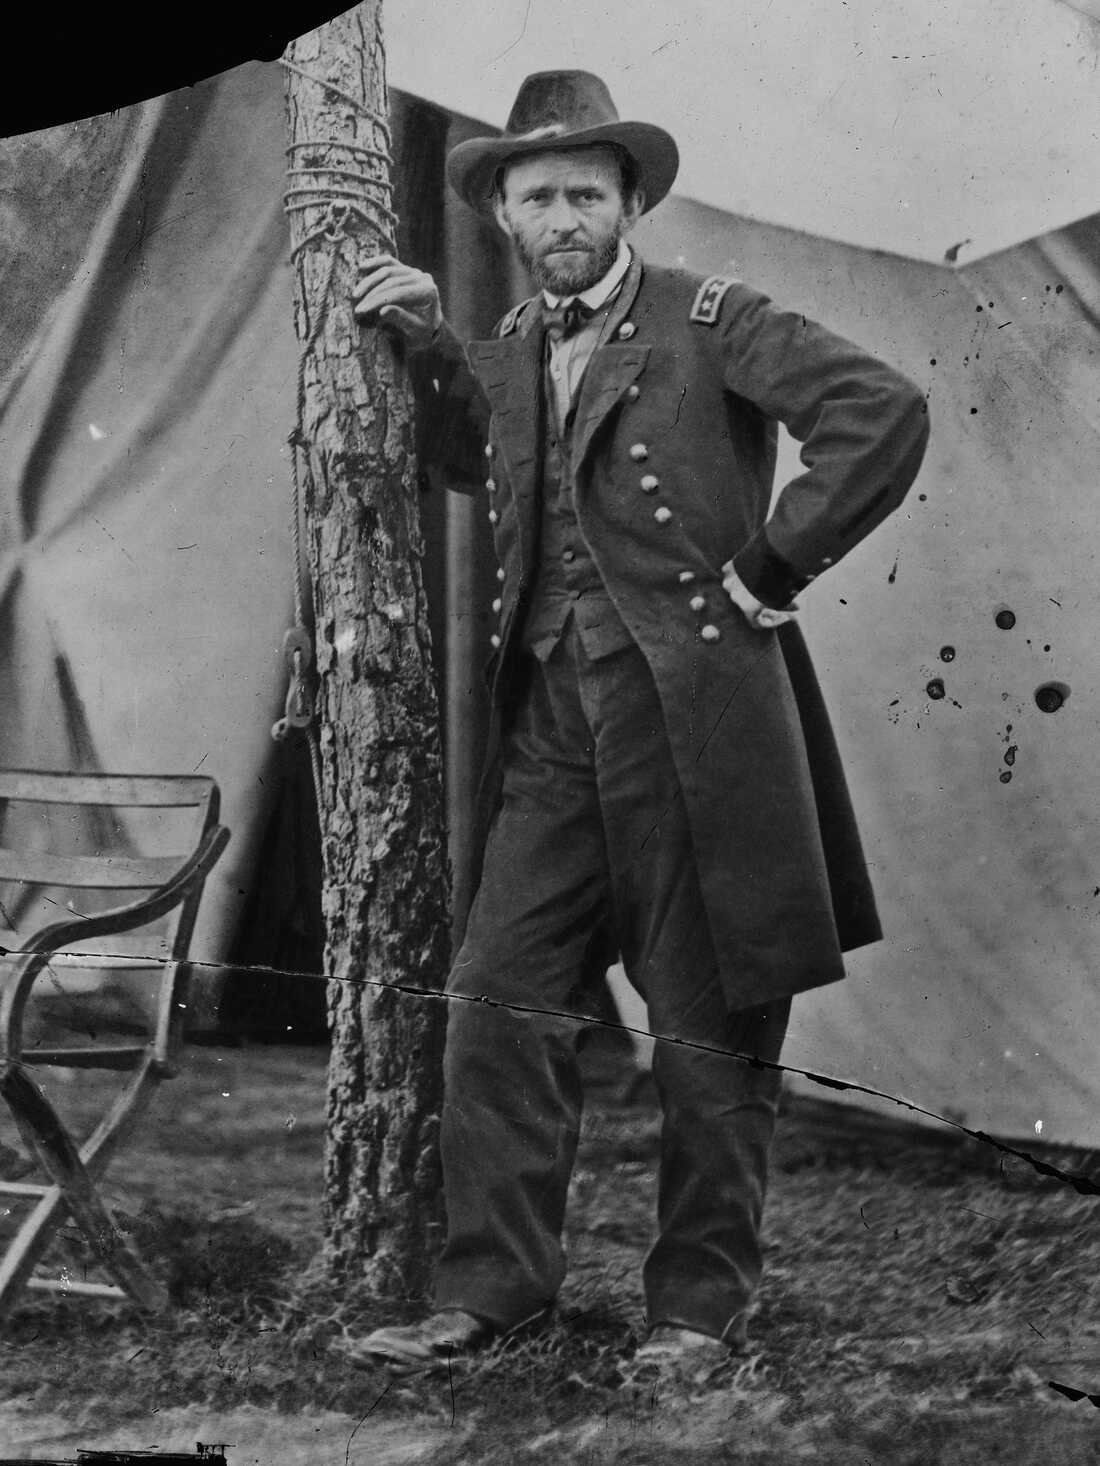 A Very Weird Photo Of Ulysses S. Grant, NPR History Dept